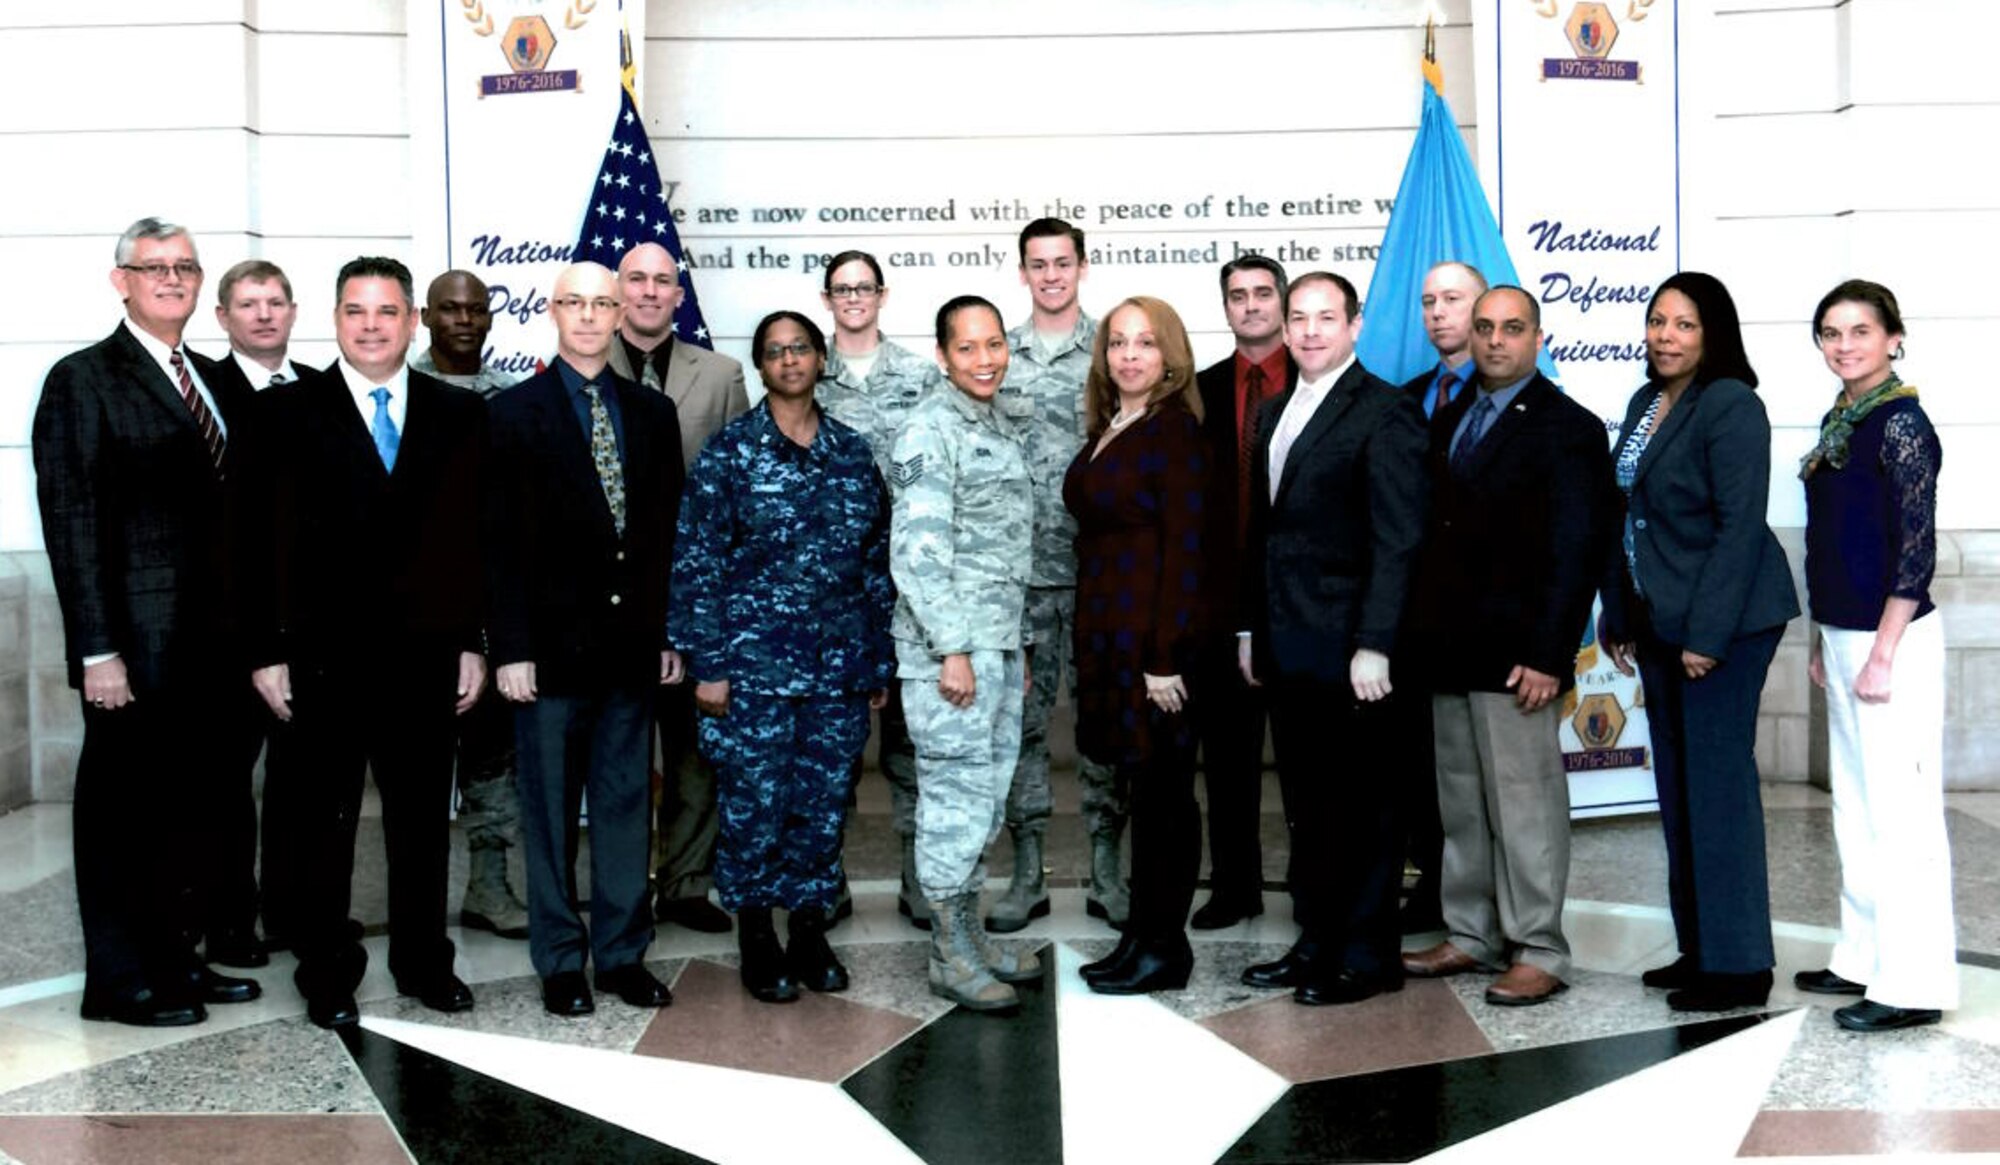 Airman 1st Class Lindsey Plotner and Airman 1st Class Joseph Mousch, center, back row, are pictured with the staff and seminar leaders for the Reserve Component National Security Course at the National Defense University. Plotner and Mousch, provided administrative support for the course, an assignment much different from their primary duties as aircraft maintenance specialists.